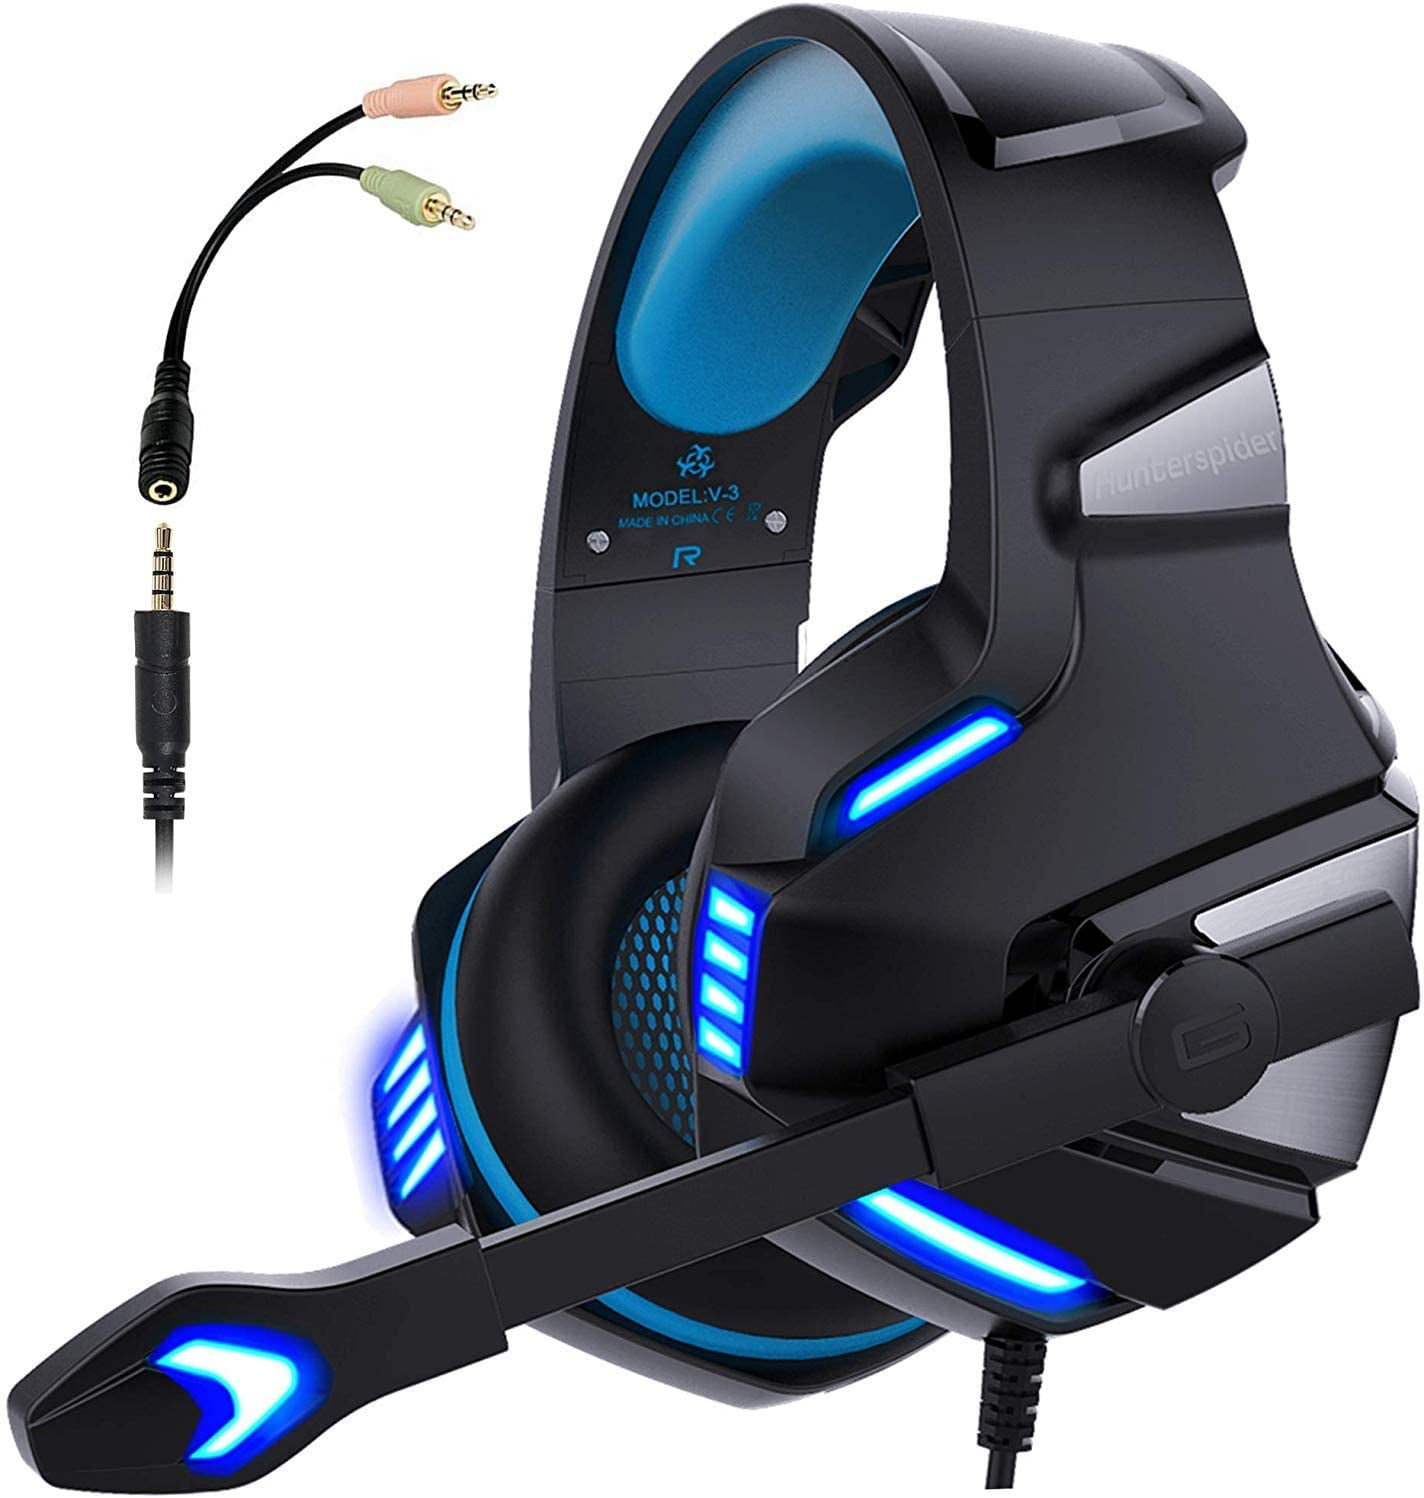 Gaming Headset for Xbox One, PS4, PC, Over Ear Gaming Headphones with Noise  Cancelling Mic LED Light, Stereo Bass Surround, Soft - Walmart.com